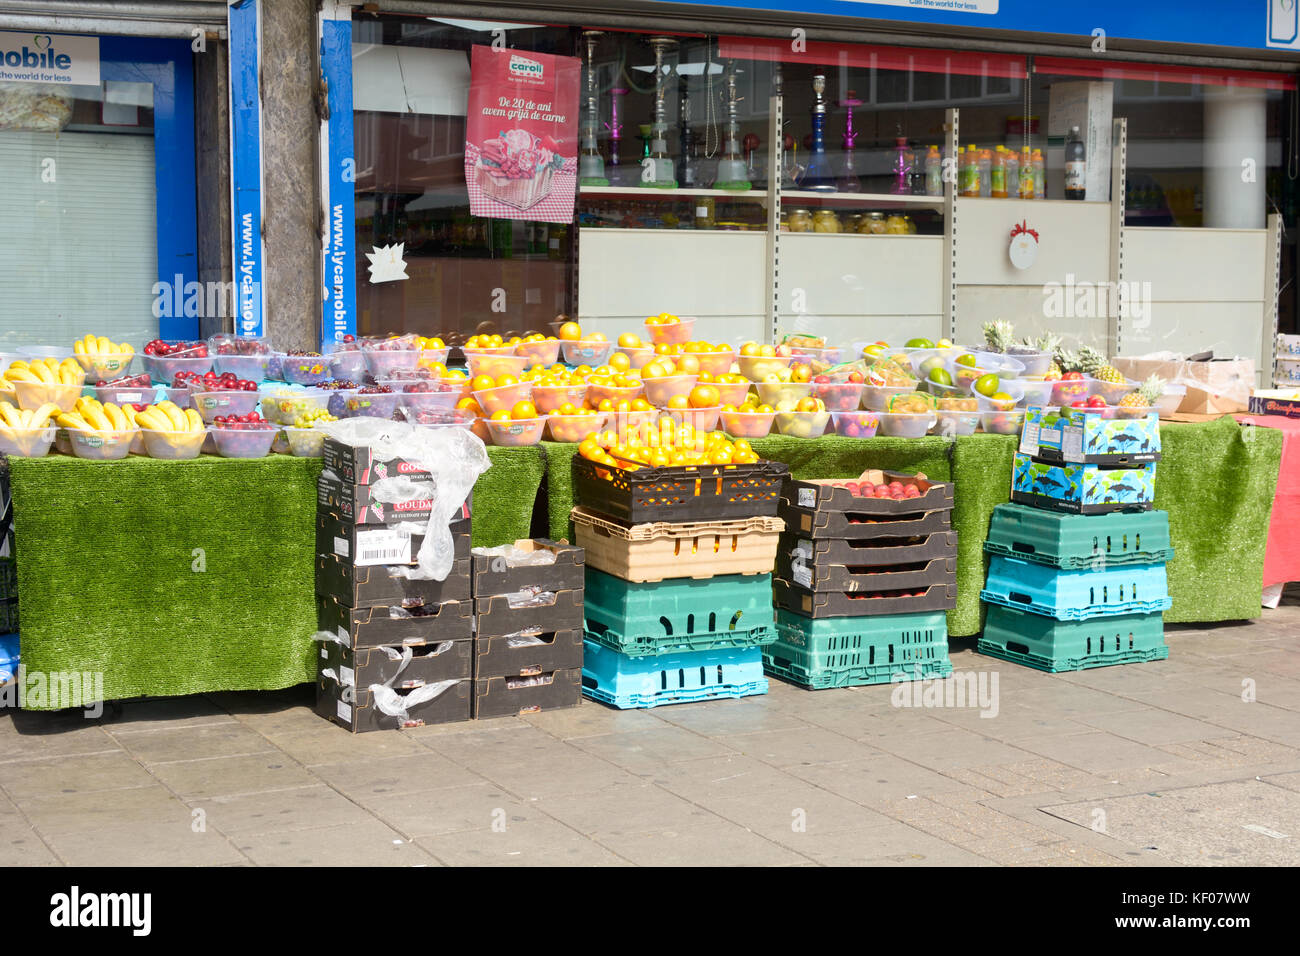 Fruit and vegetables for sale outside Polish shop in Bedford, Bedfordshire, England Stock Photo